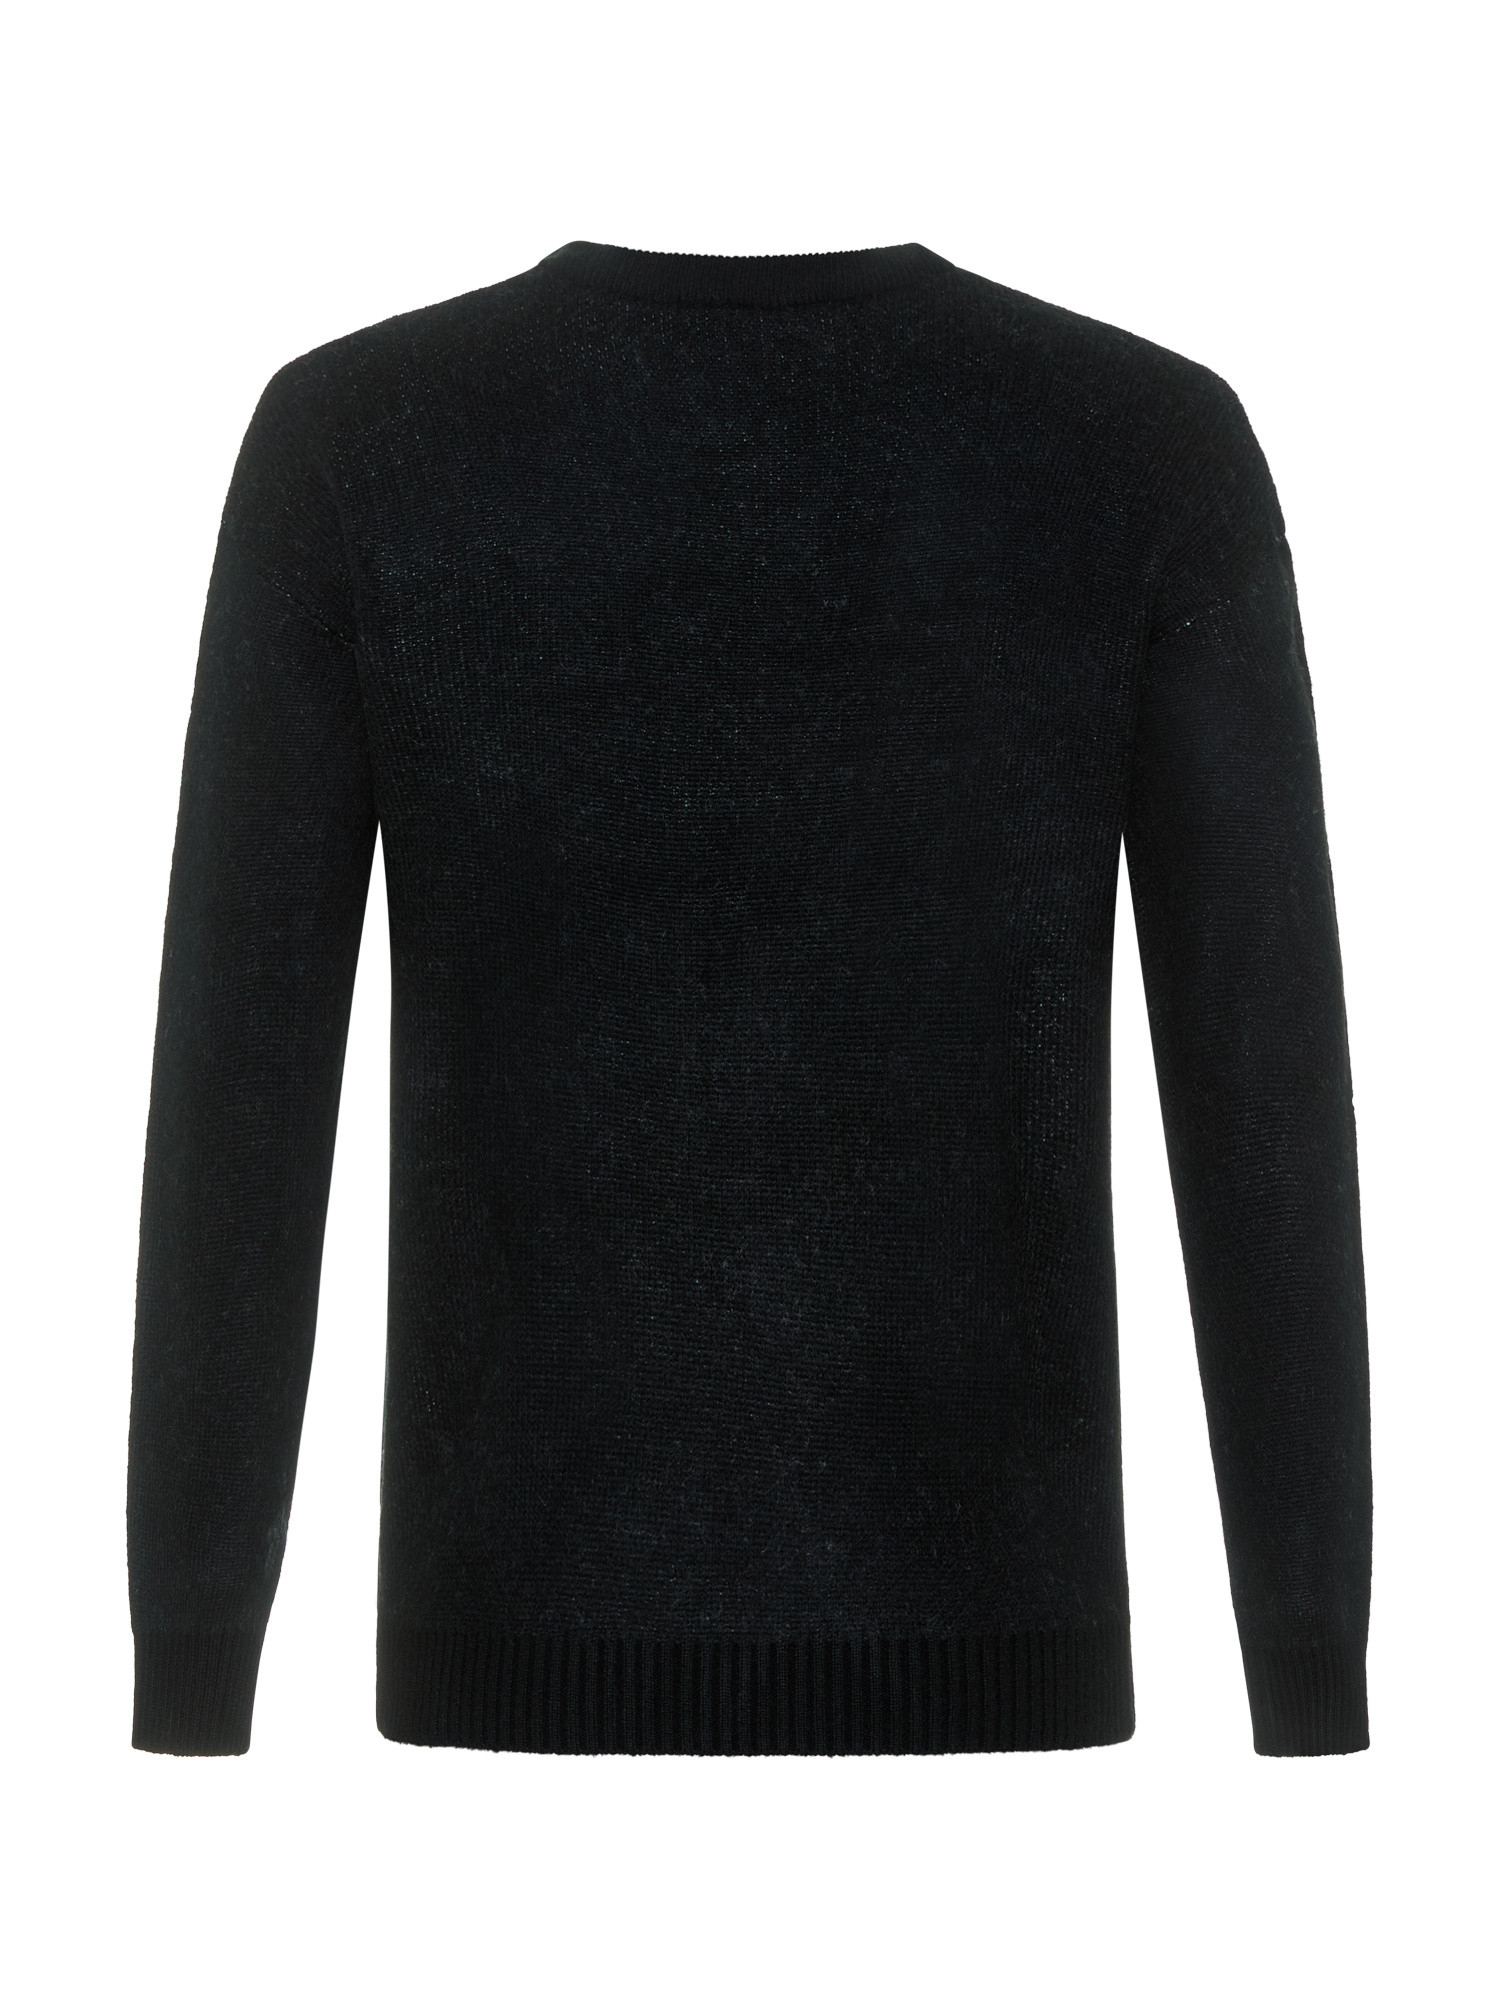 Usual - Usualism Sweater, Black, large image number 1